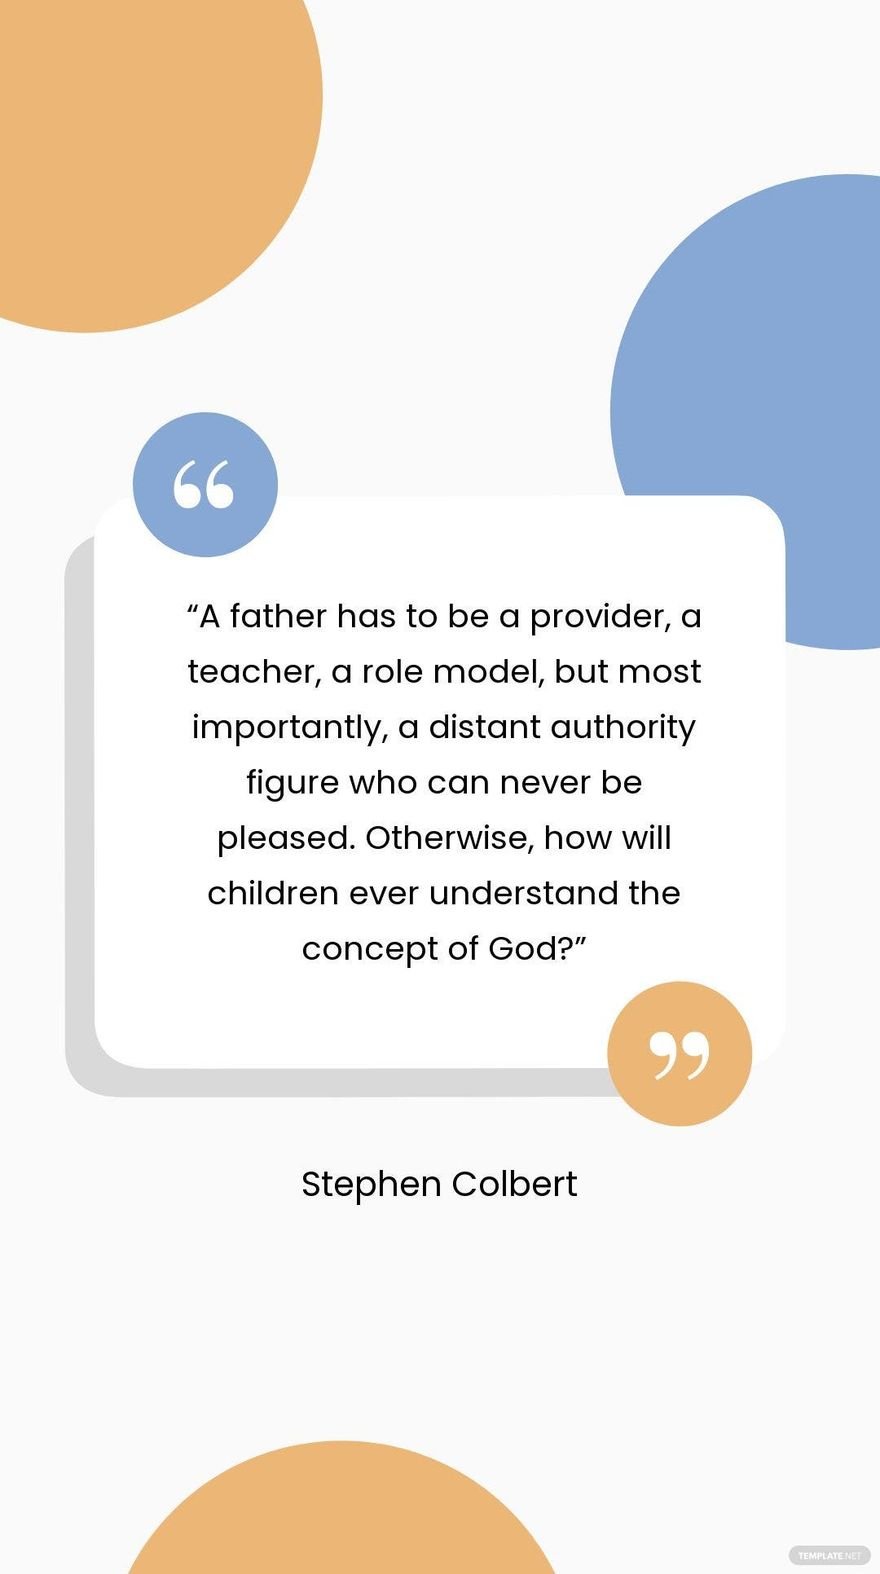 Free  Stephen Colbert - A father has to be a provider, a teacher, a role model, but most importantly, a distant authority figure who can never be pleased. Otherwise, how will children ever understand the c in JPG